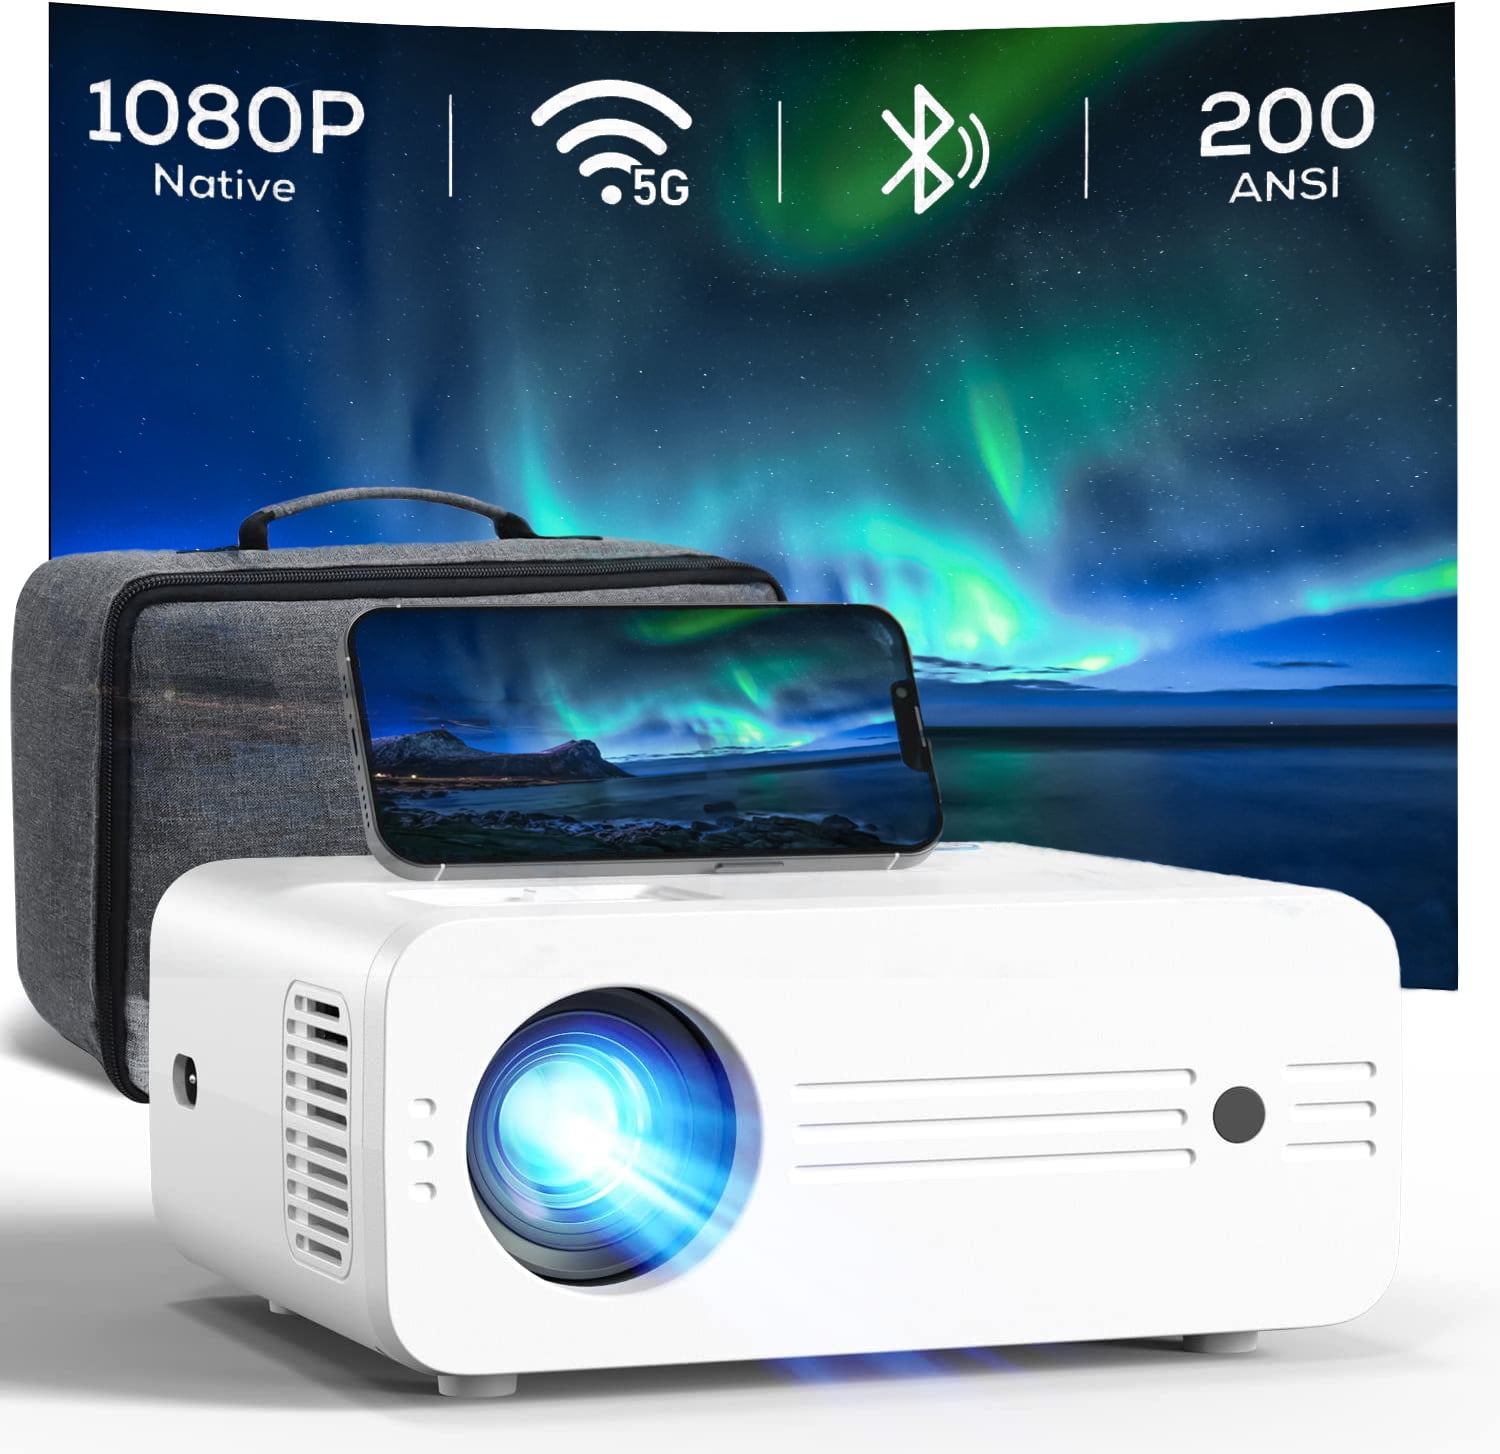 YOTON Video Projector With 5G Wifi and Bluetooth, Support 4K,15000 Lumens  Full HD Movie Projector,300 Display